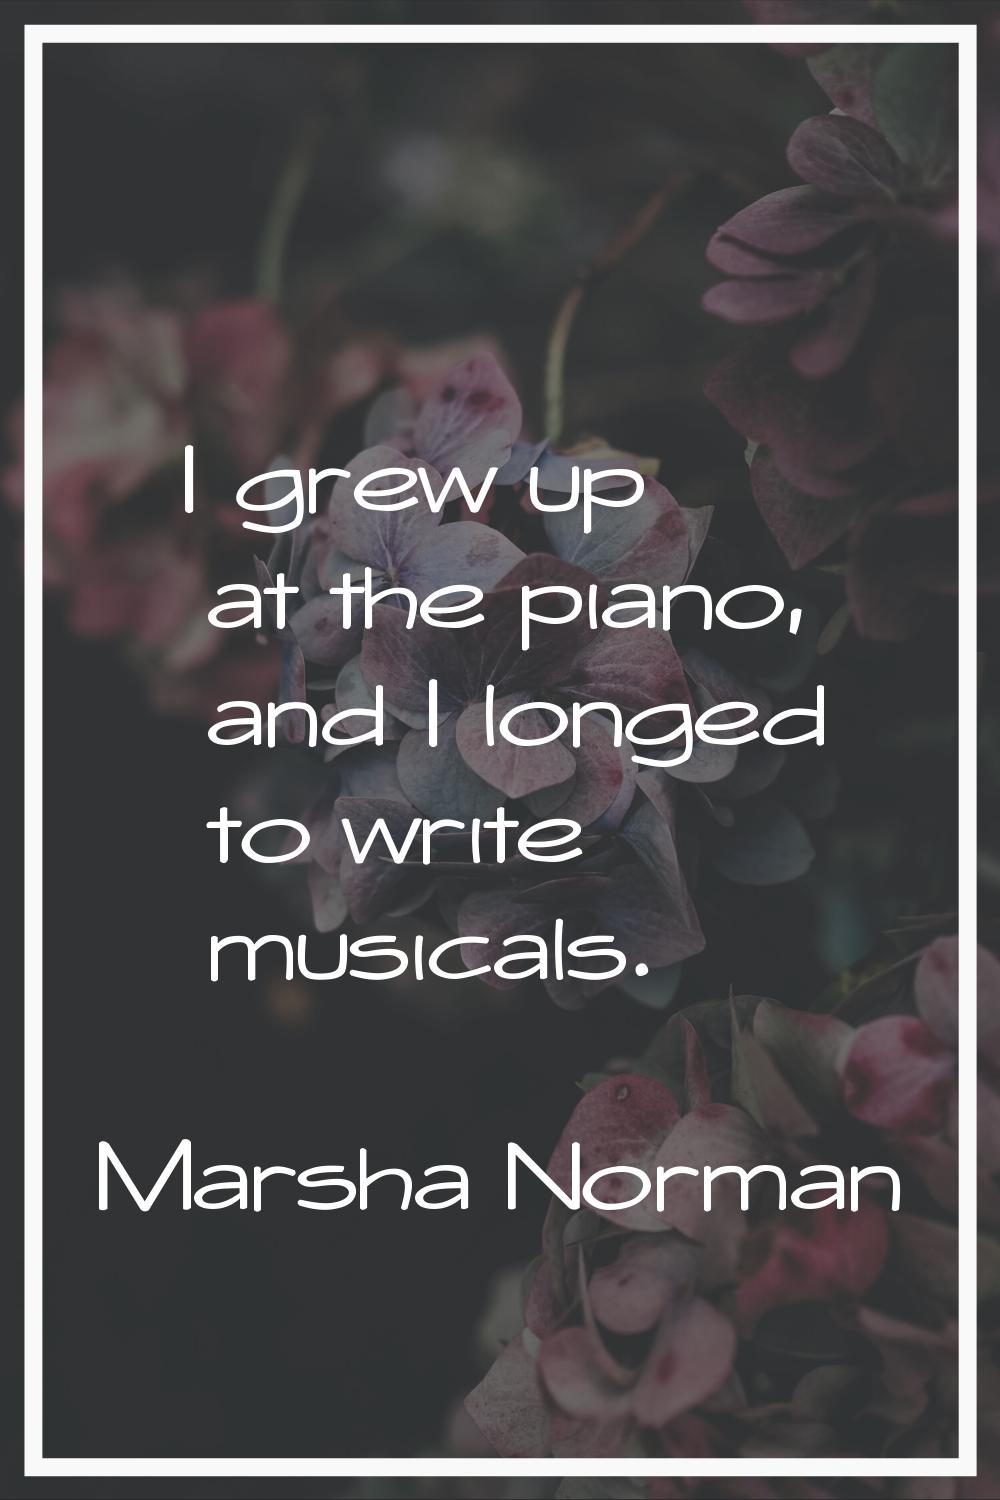 I grew up at the piano, and I longed to write musicals.